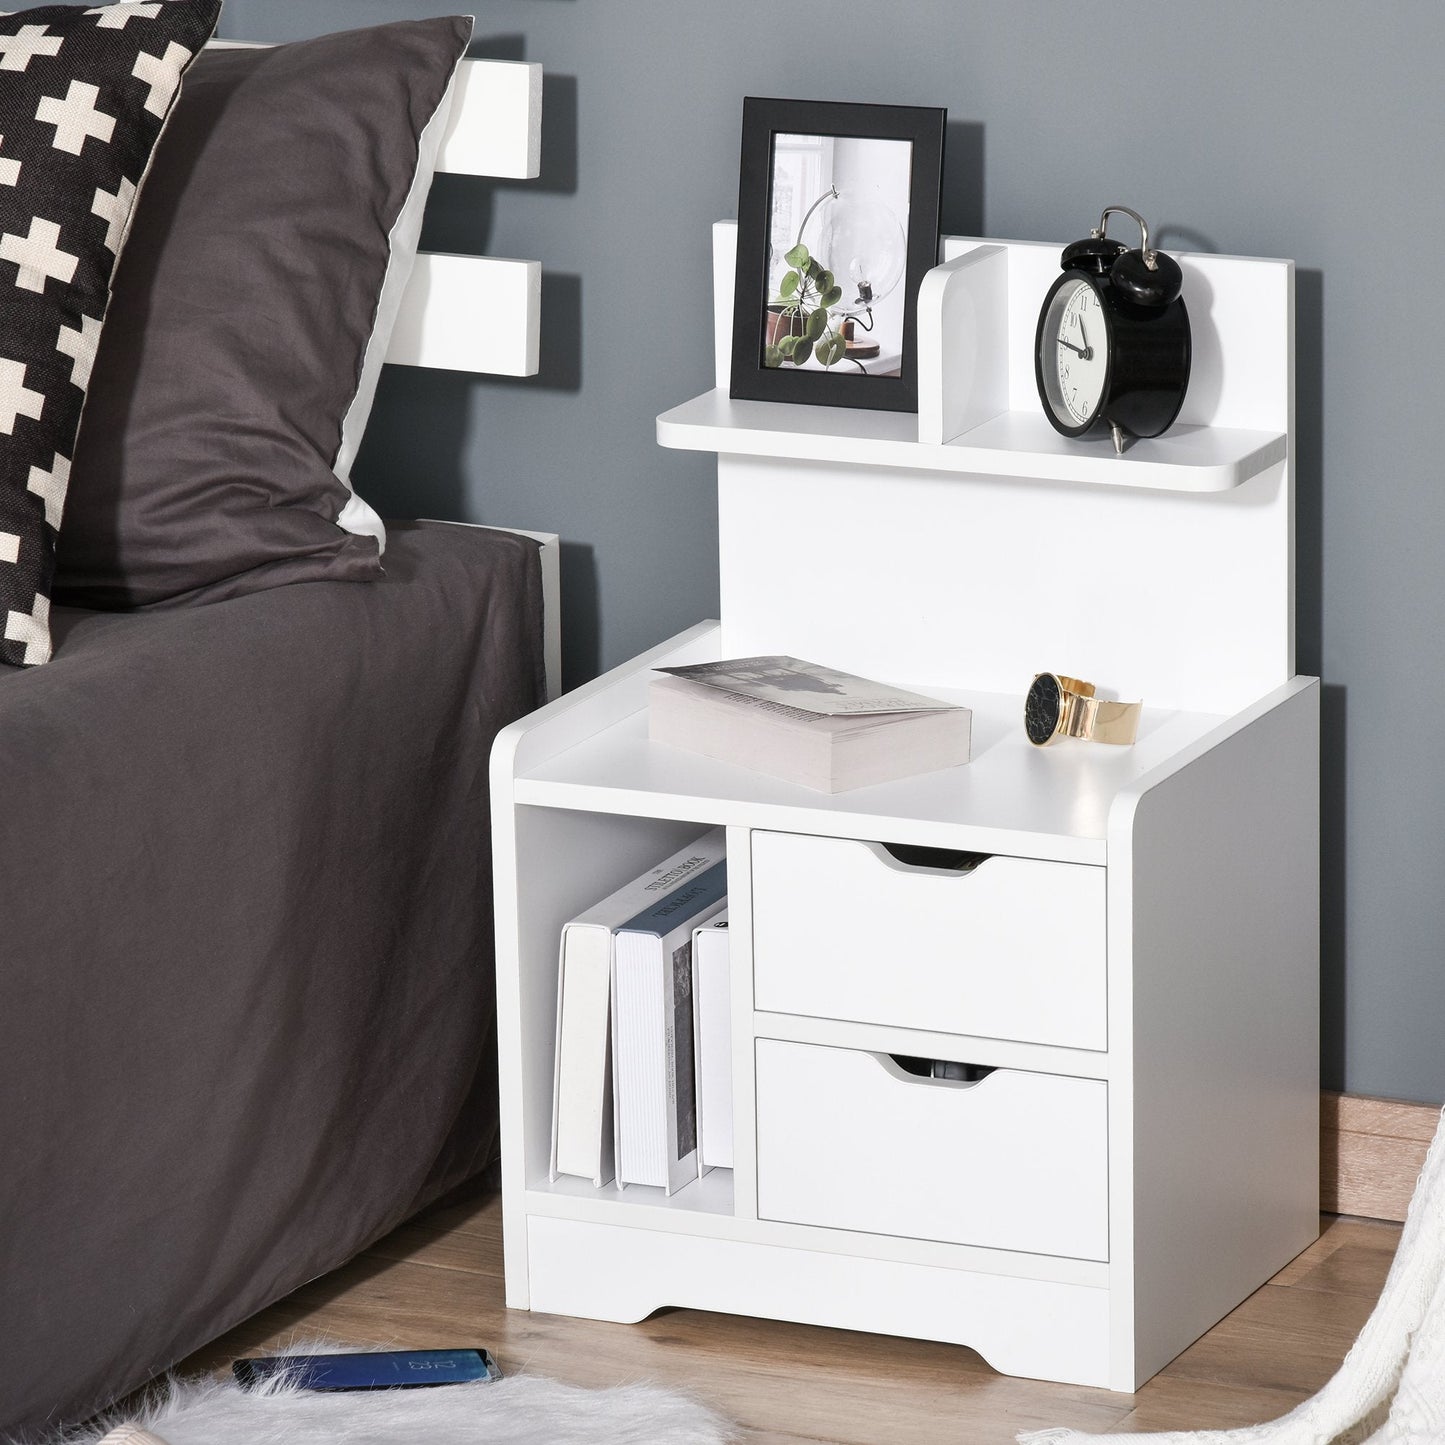 HOMCOM Bedside Table with 2 Drawers and Storage Shelves for Living Room Bedroom Accent Table Small Cabinet, White